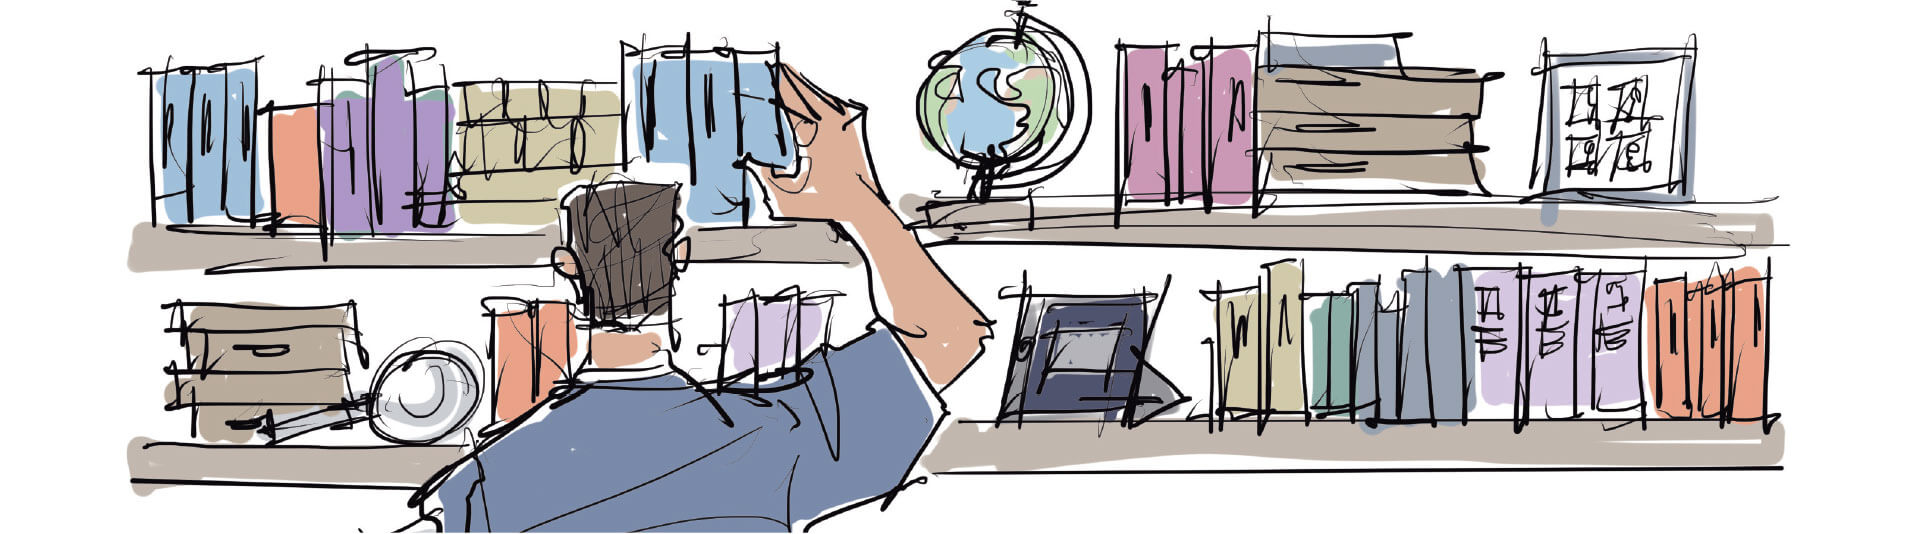 An illustration of a person reaching to take something from one of two shelves. The shelves contain mostly different coloured books, along with some photo frames, a world globe, and a magnifying glass.